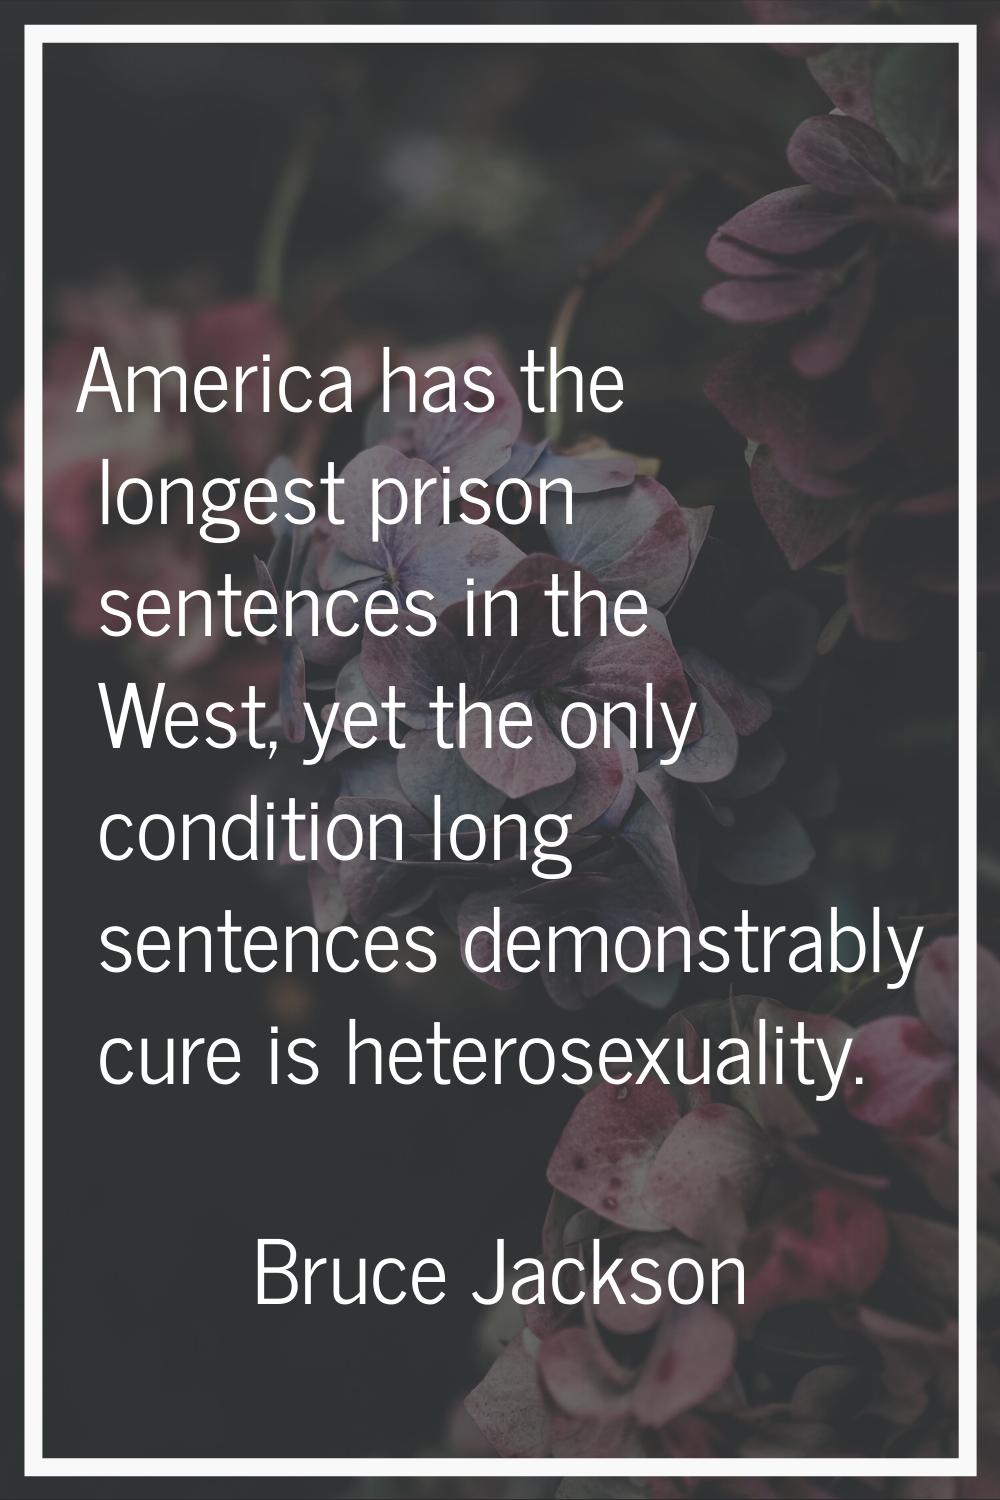 America has the longest prison sentences in the West, yet the only condition long sentences demonst